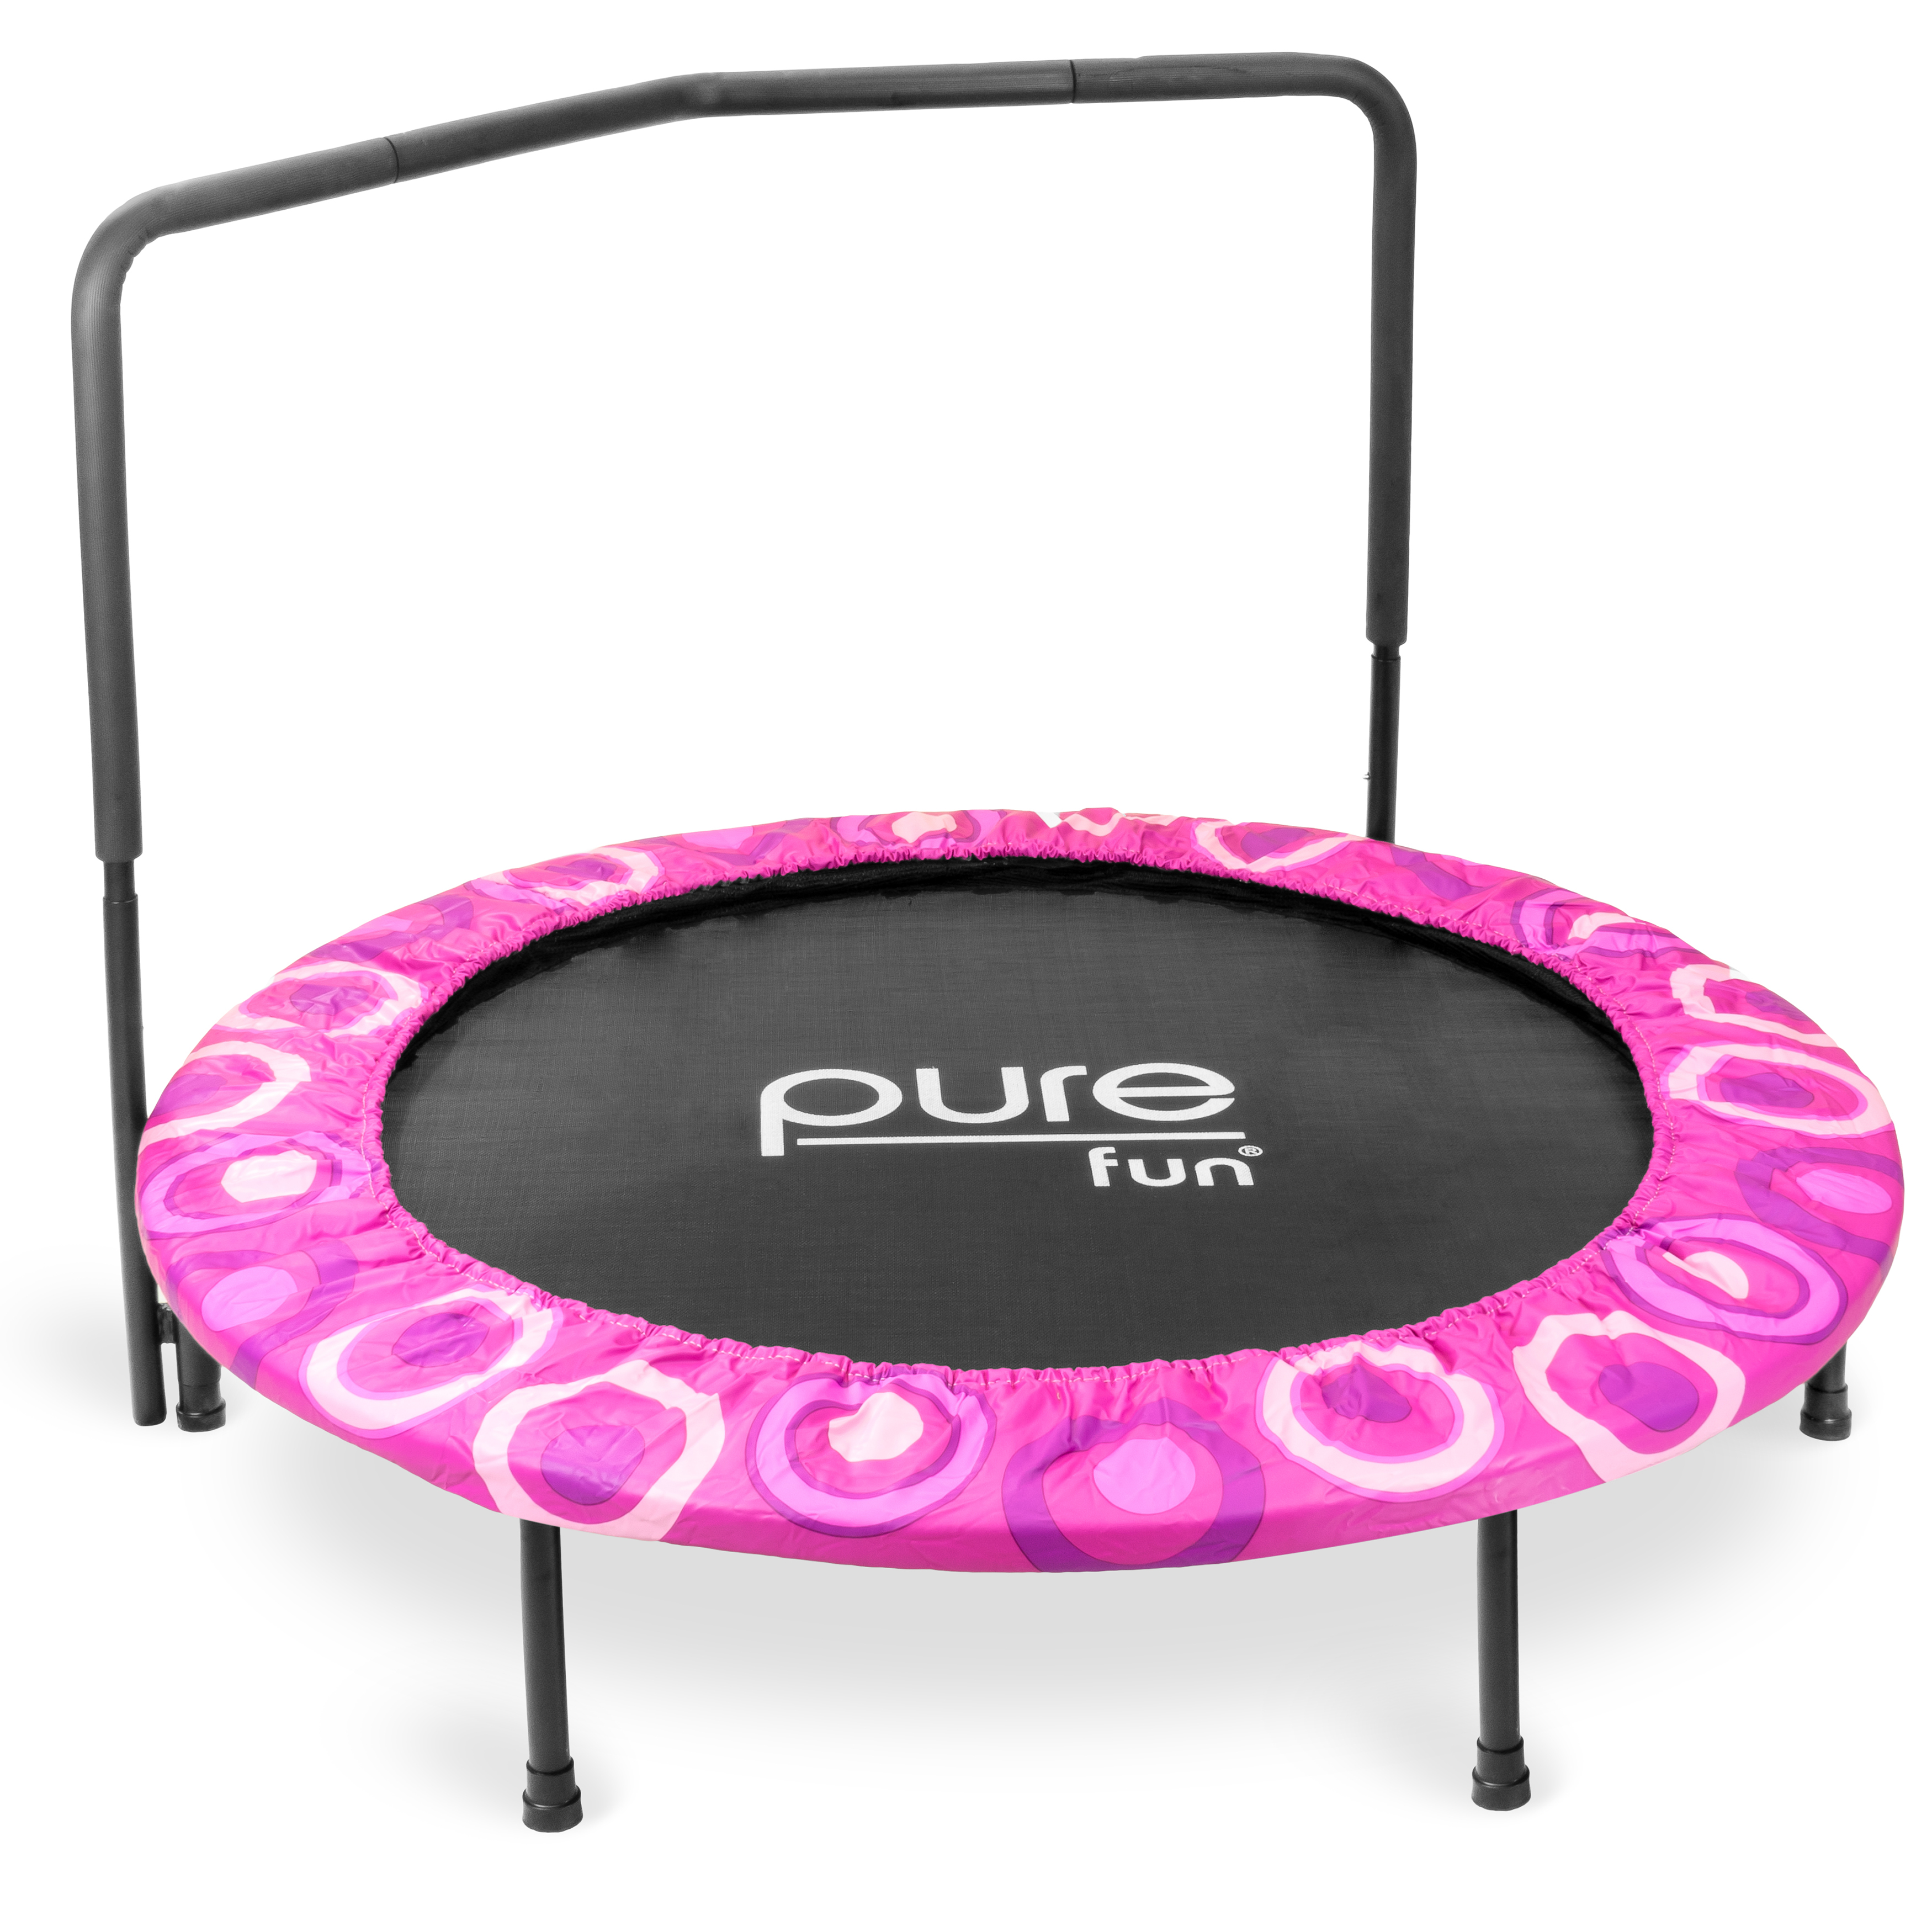 Pure Fun Super Jumper Kids 48-Inch Trampoline with Handrail, Pink, 100lb Weight Limit - image 6 of 6